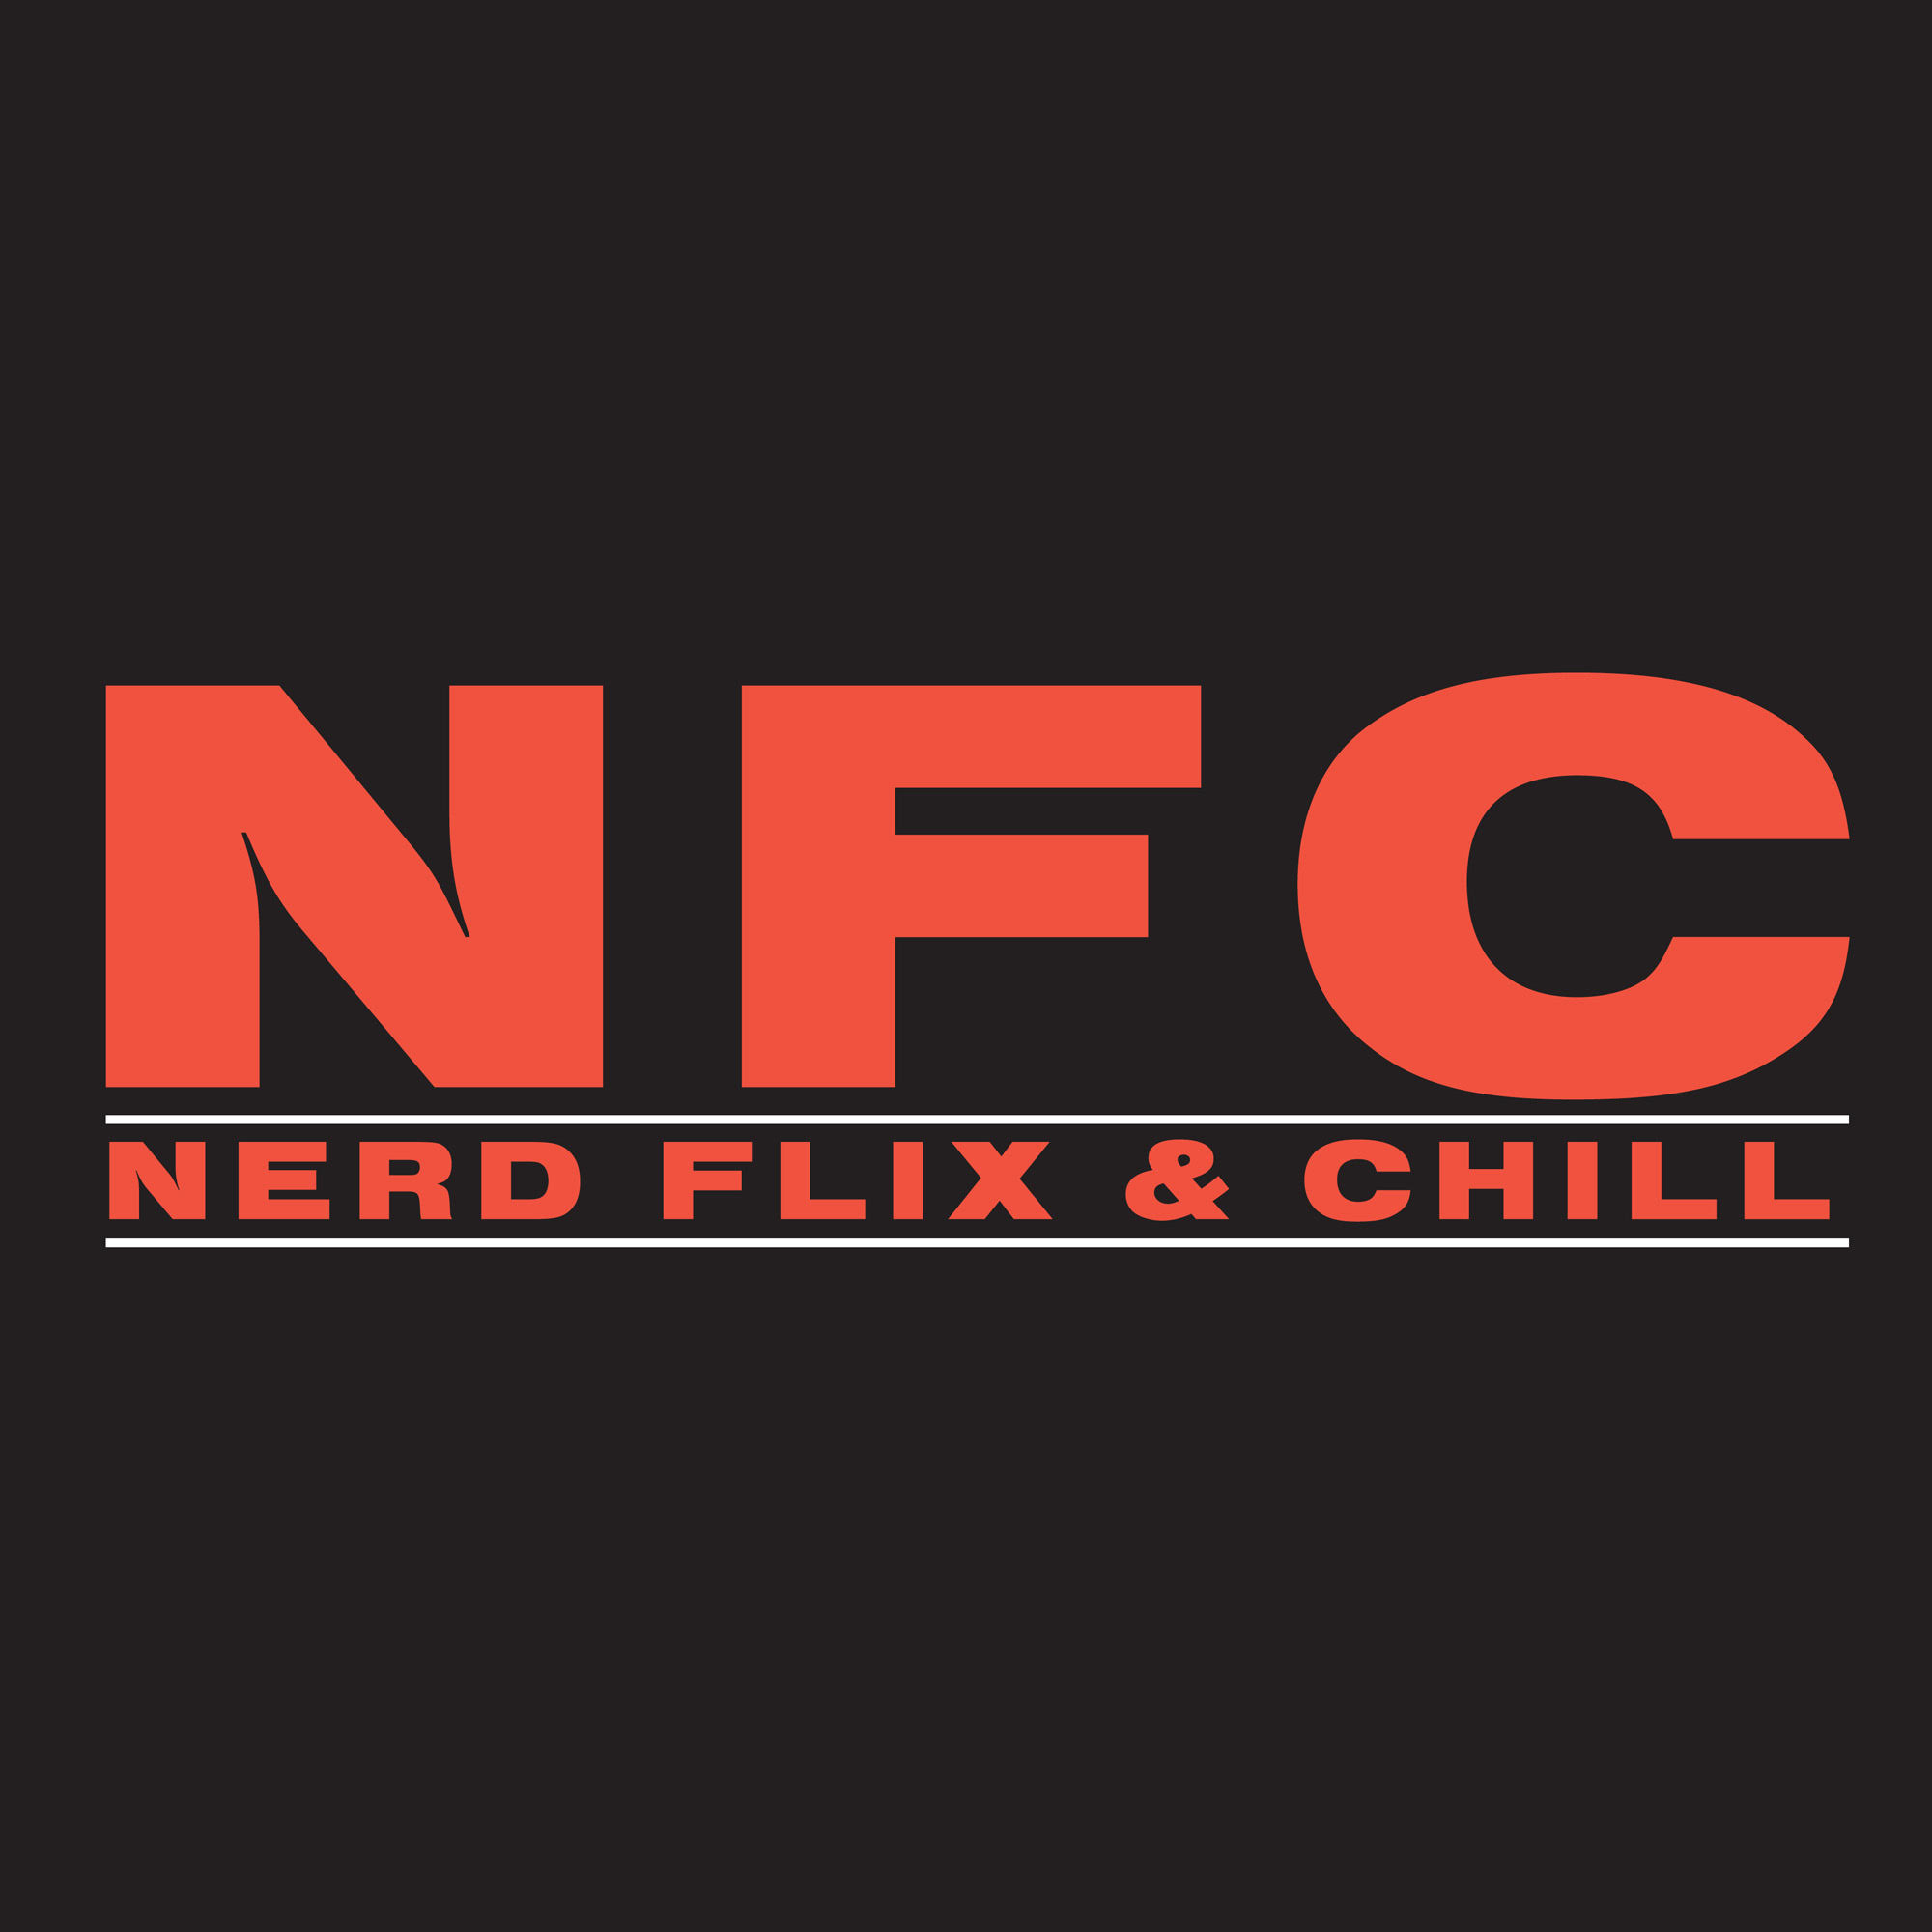 NFC’s 5th Anniversary Podcast Talks Game of Thrones, Star Wars, MST3K and More!